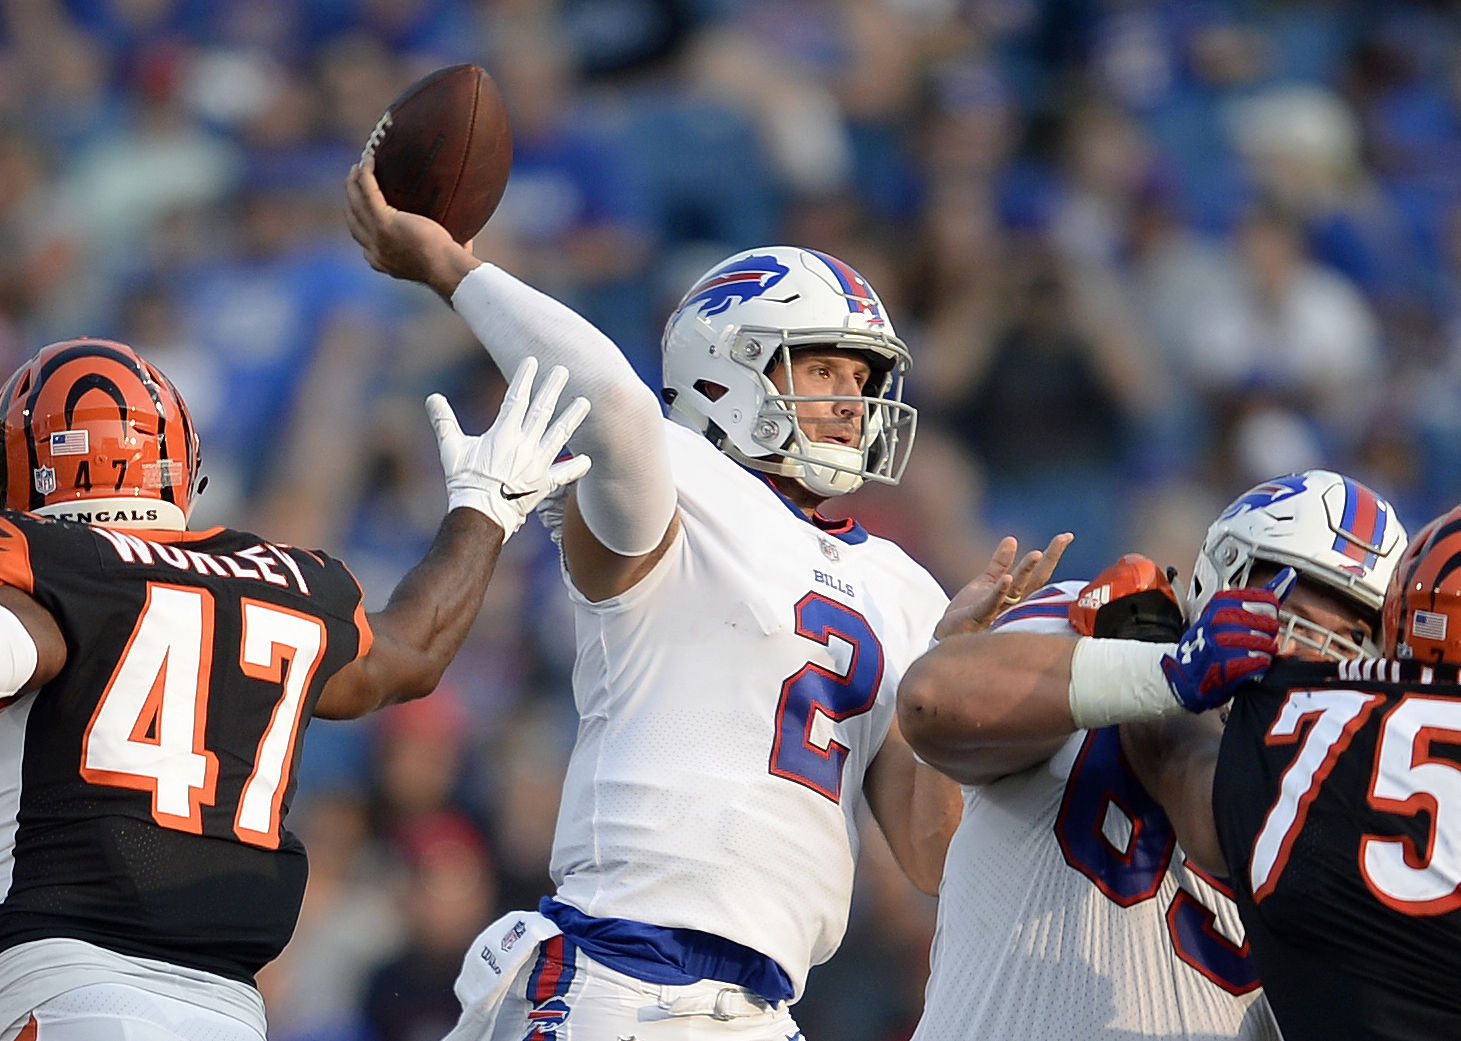 FILE - In this Aug. 26, 2018, file photo, Buffalo Bills quarterback Nathan Peterman (2) throws a pass during the second half of a preseason NFL football game against the Cincinnati Bengals, in Orchard Park, N.Y. The Buffalo Bills have named Nathan Peterman their starting quarterback in a job the second-year player is expected to hold until rookie first-round pick Josh Allen is deemed ready. The Bills made the announcement on their Twitter account before practice Monday morning, Sept. 3, 2018, as the team prepares for its season opener at Baltimore on Sunday. (AP Photo/Adrian Kraus, File)